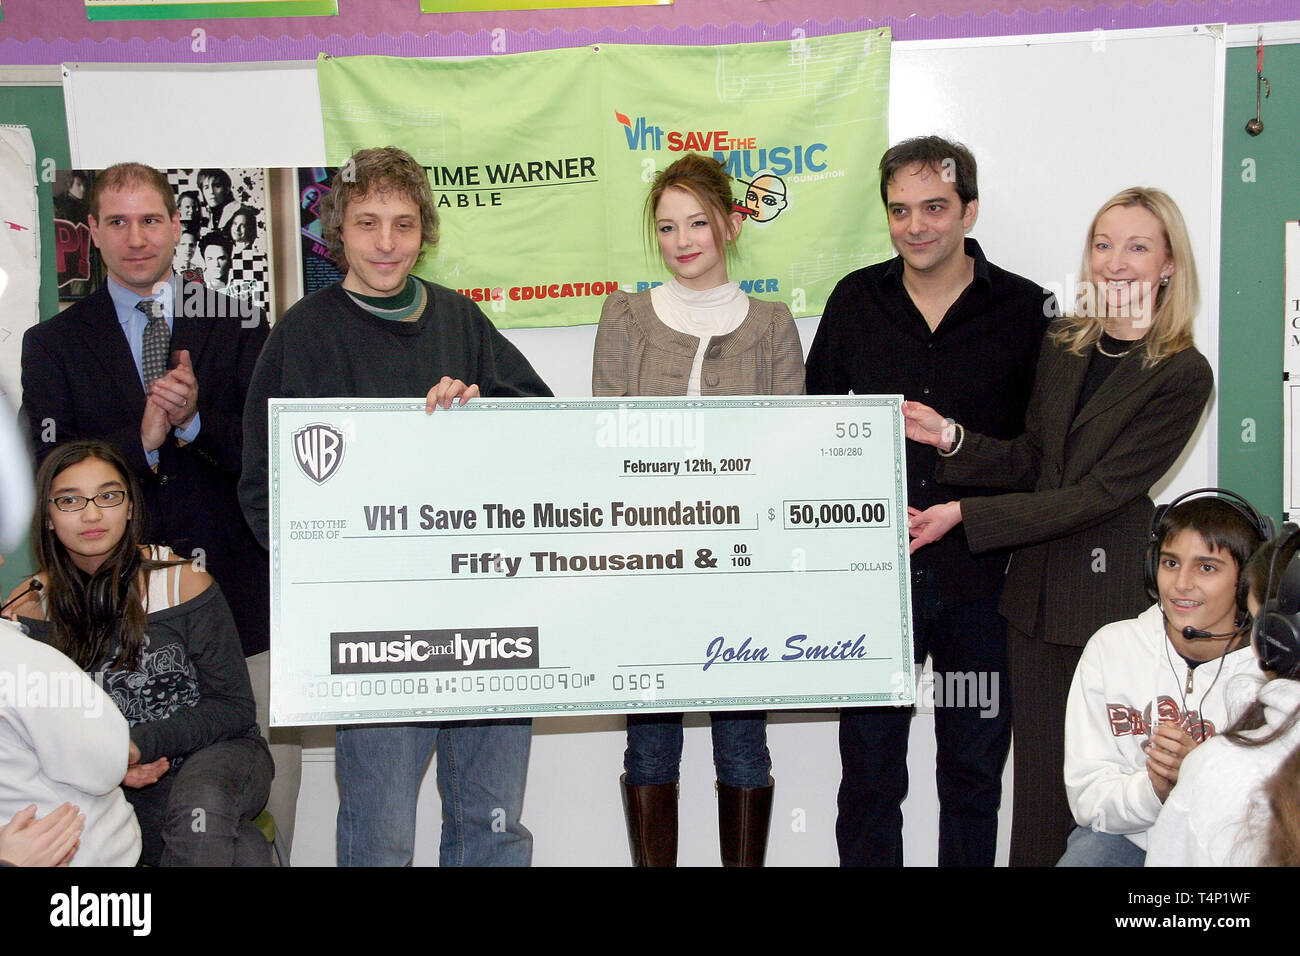 New York, USA. 13 Feb, 2007.  Brian Culot, Marc Lawrence, Haley Bennett, Suzanne Giuliani, Adam Schlesinger, Laurie Schopp at a Charity event with a $50,000 donation presented by Marc Lawrence and Haley Bennett at The Hudson Theatre on February 13, 2007 in New York, NY. Credit: Steve Mack/S.D. Mack Pictures/Alamy Stock Photo